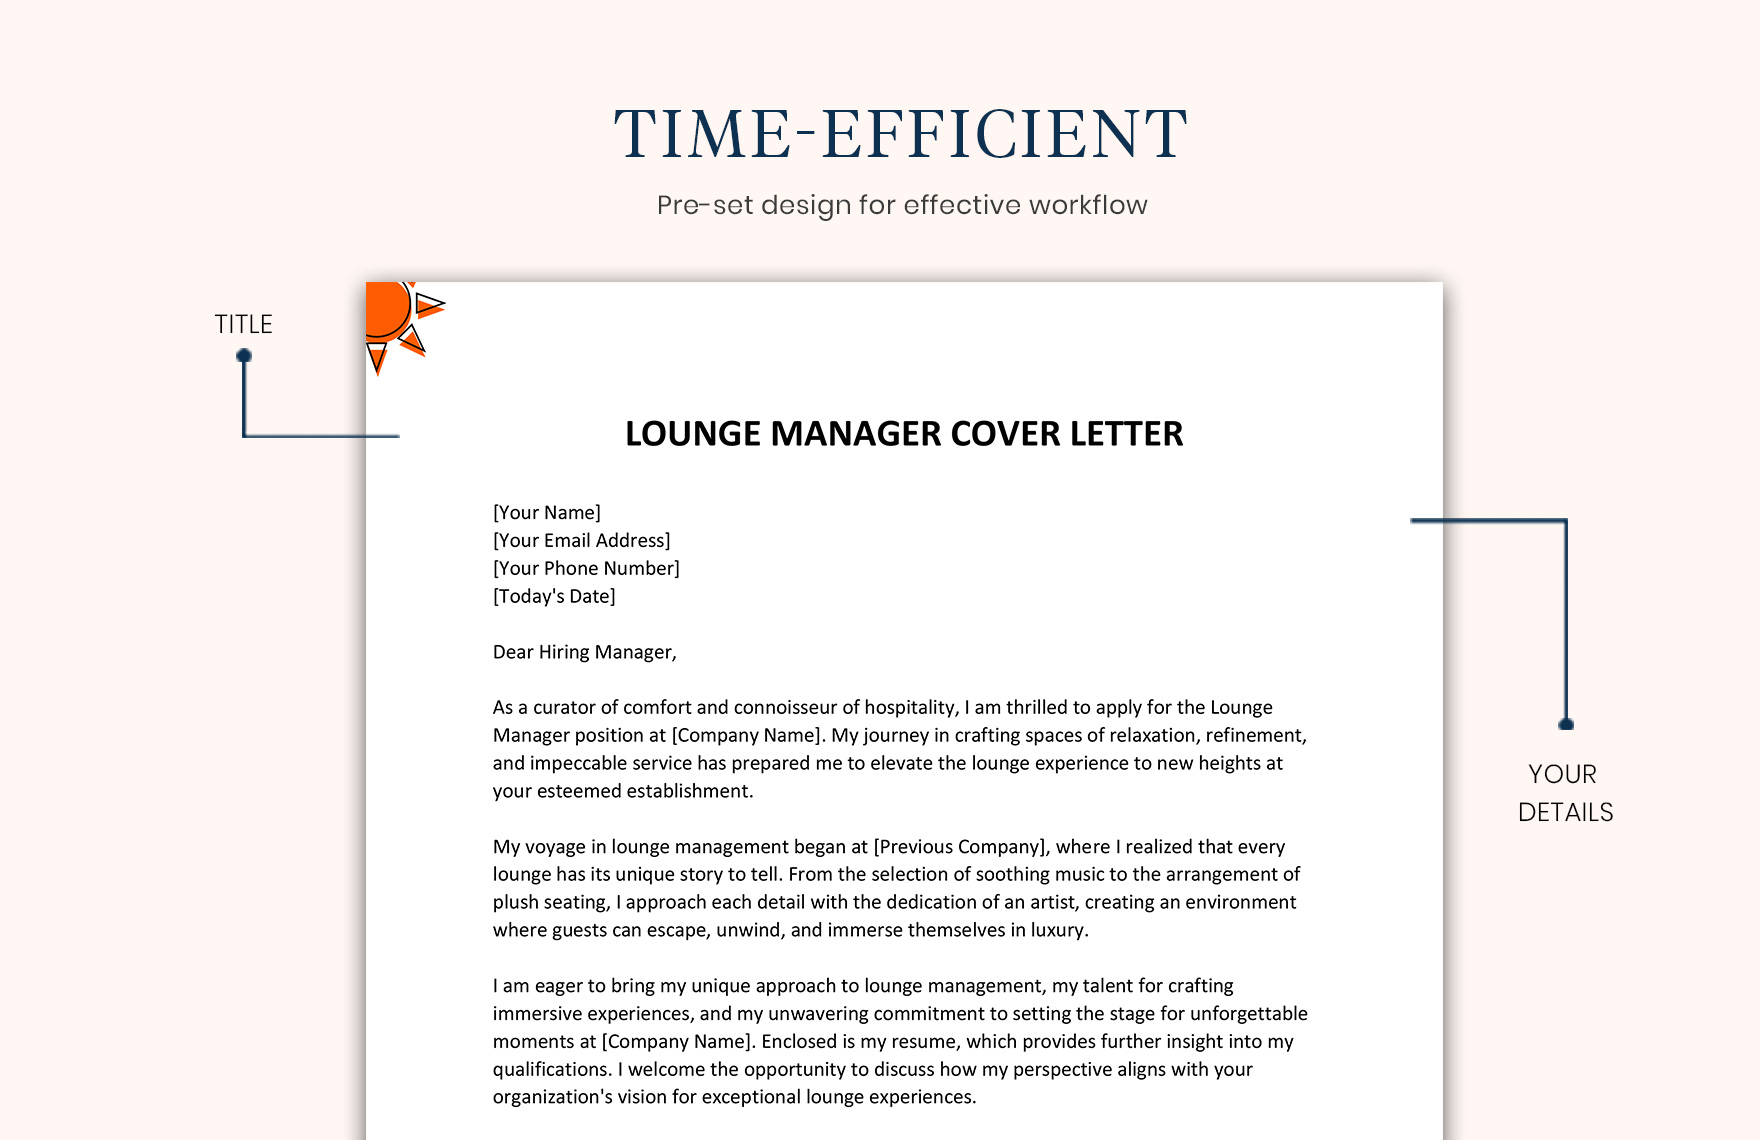 Lounge Manager Cover Letter